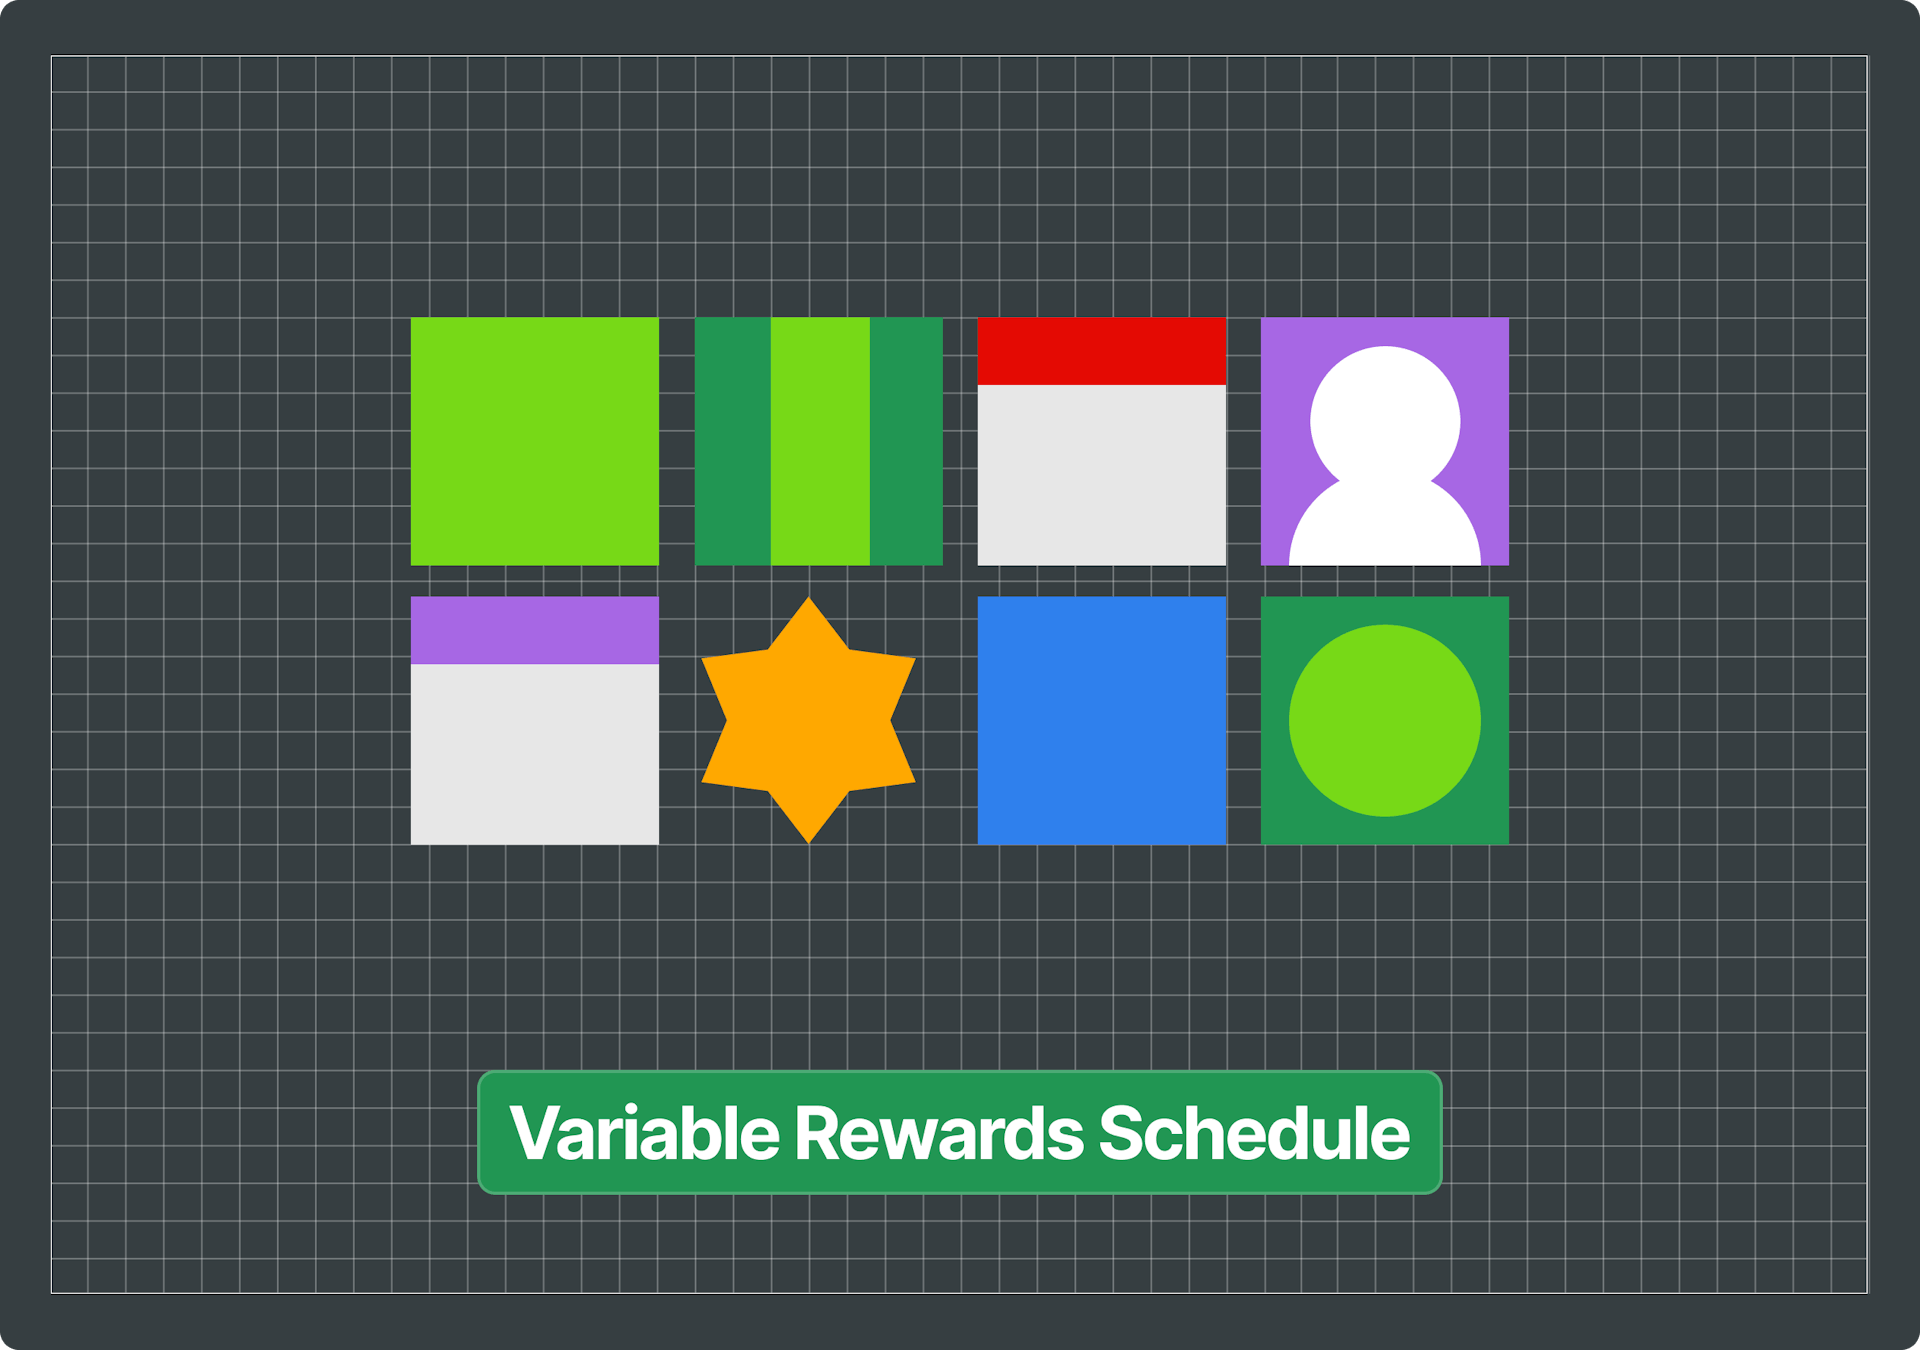 Illustration of 7 different square badges, and a yellow star. Includes text that says "Variable Rewards Schedule".